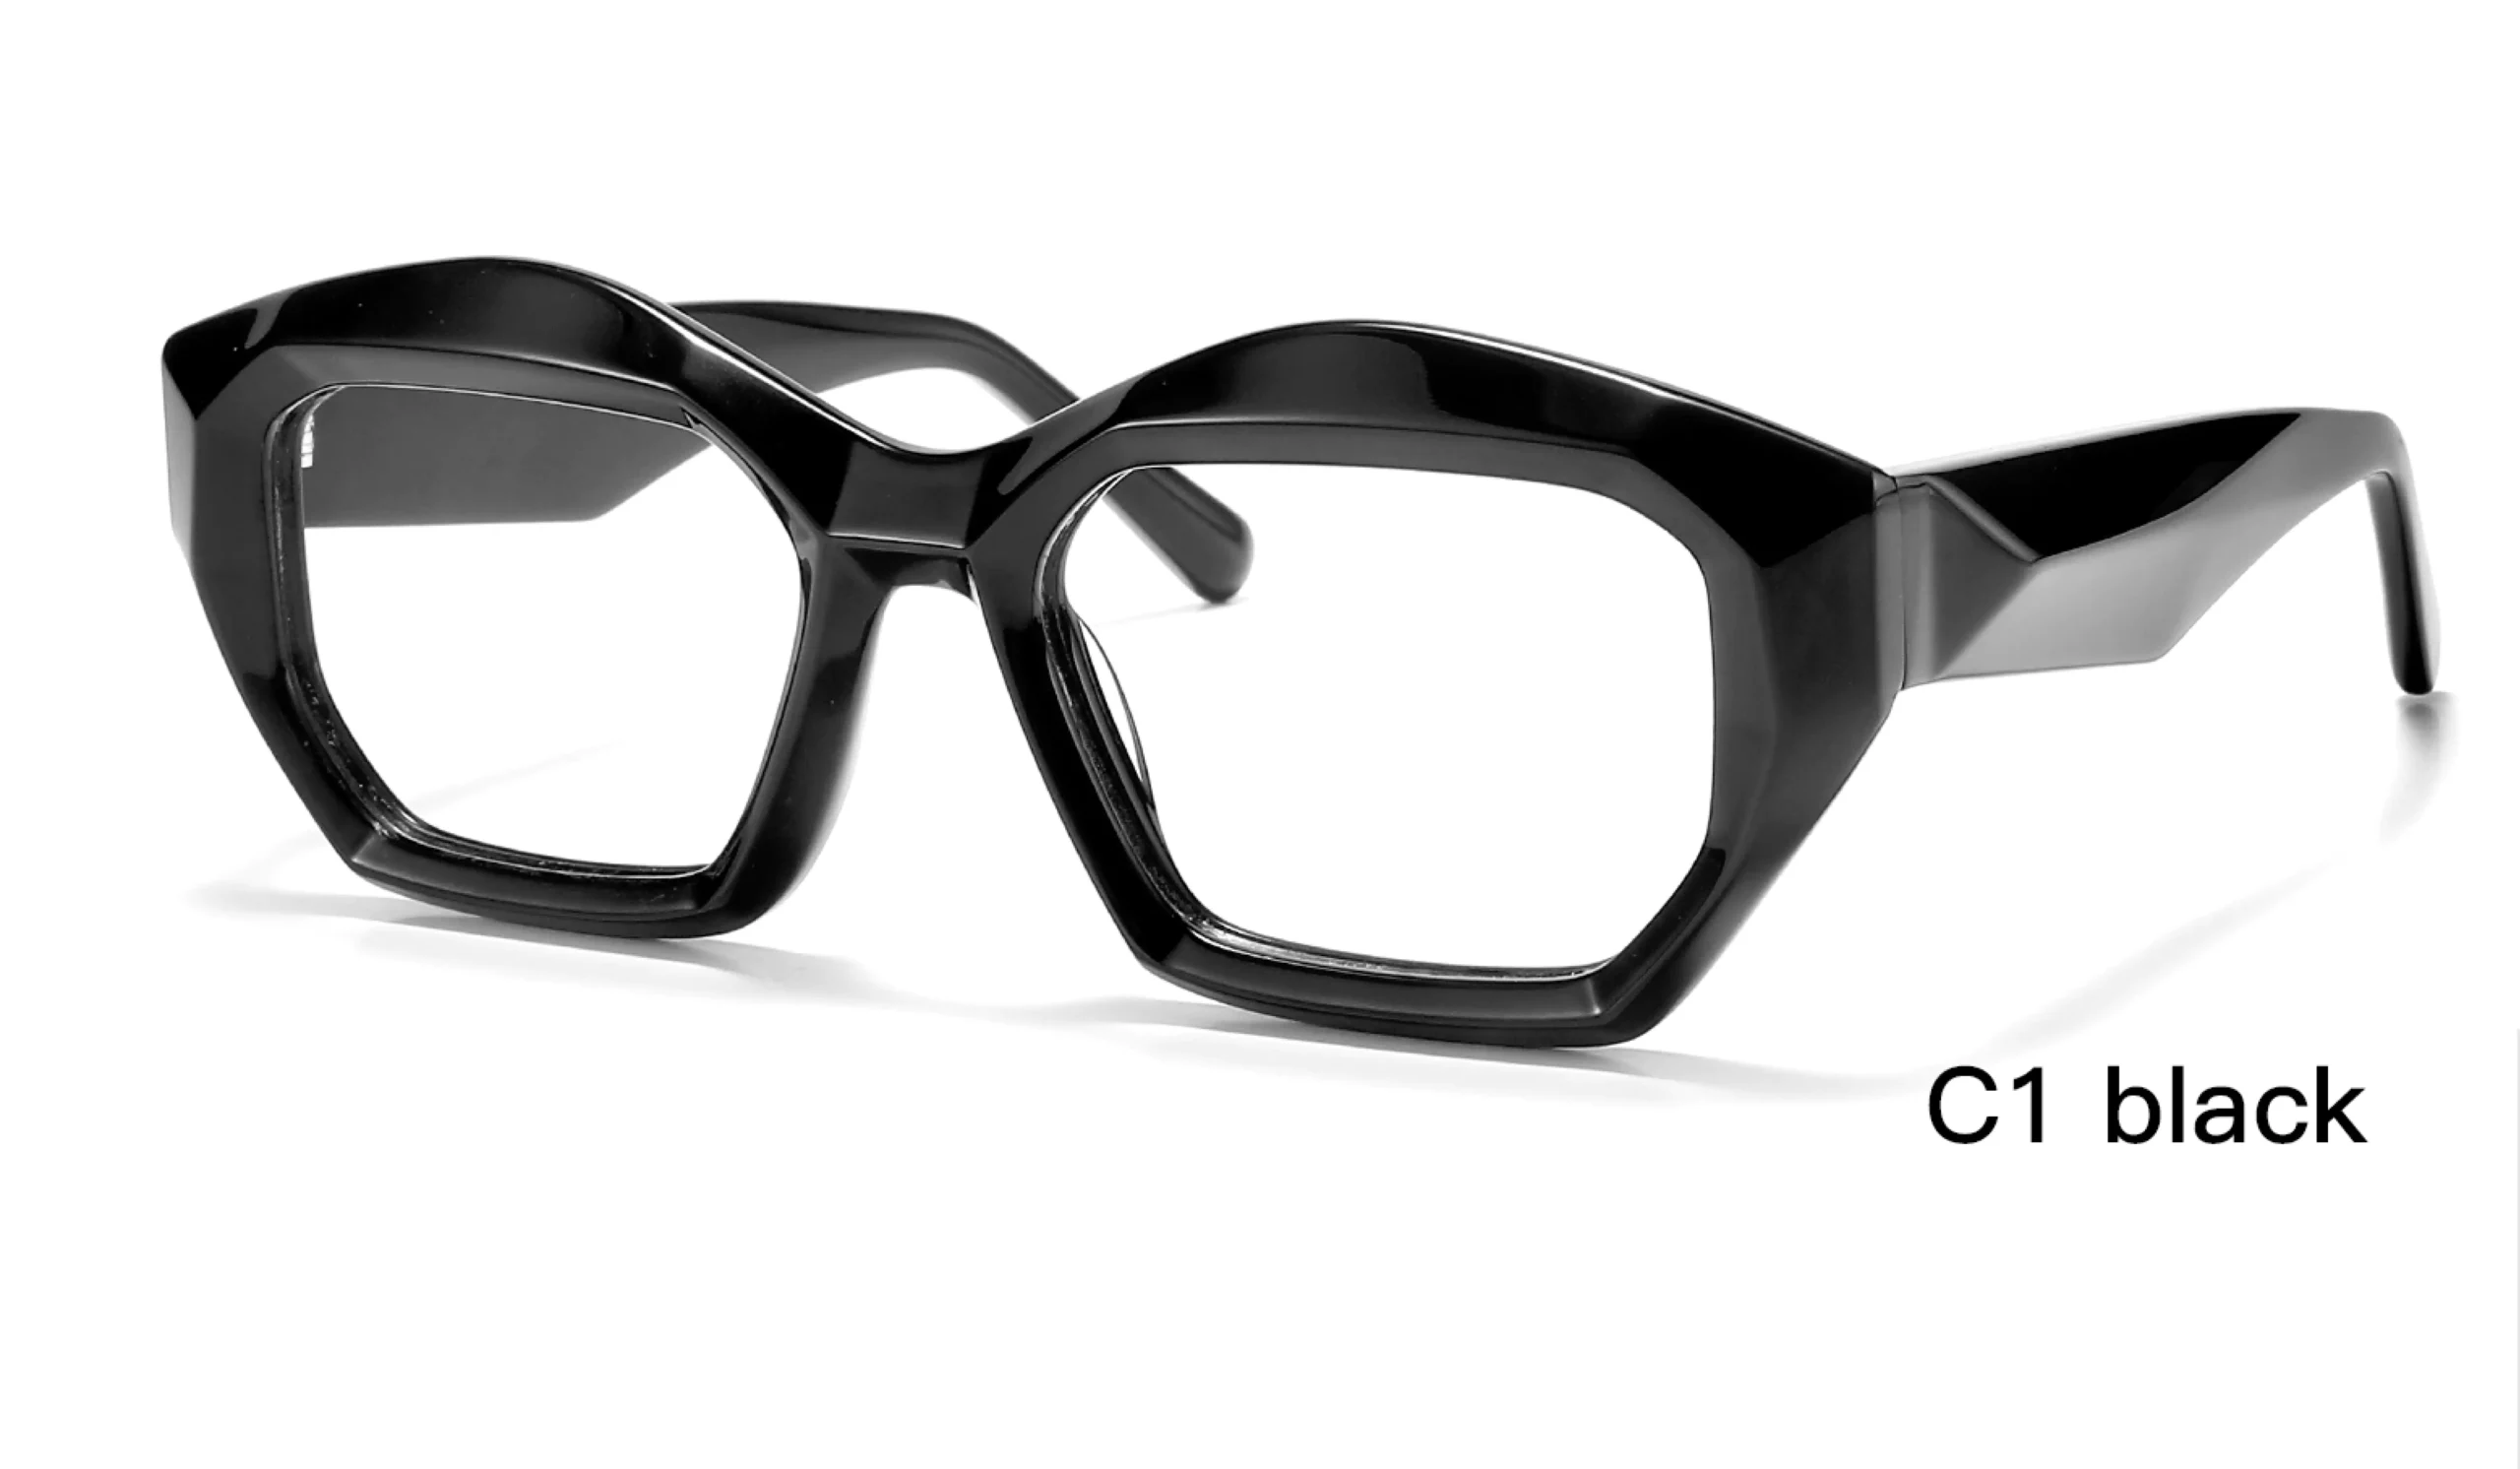 replica glasses frame, thick frame, black, stereoscopic and geometric, made in China